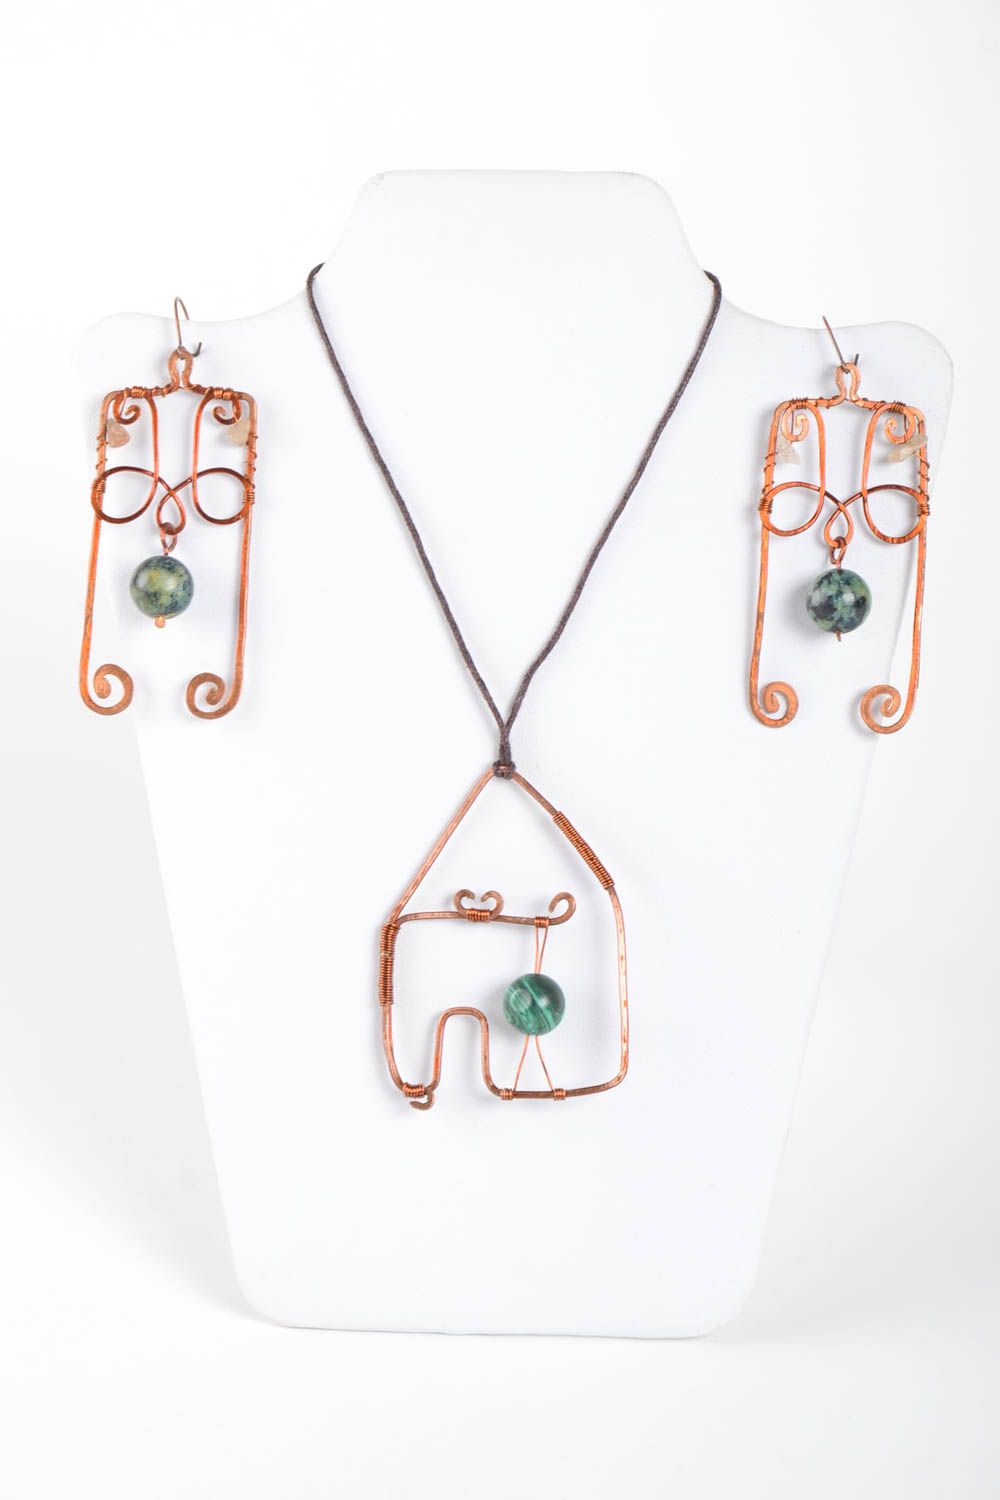 Handmade earrings with natural stones wire wrap pendant copper jewelry photo 2